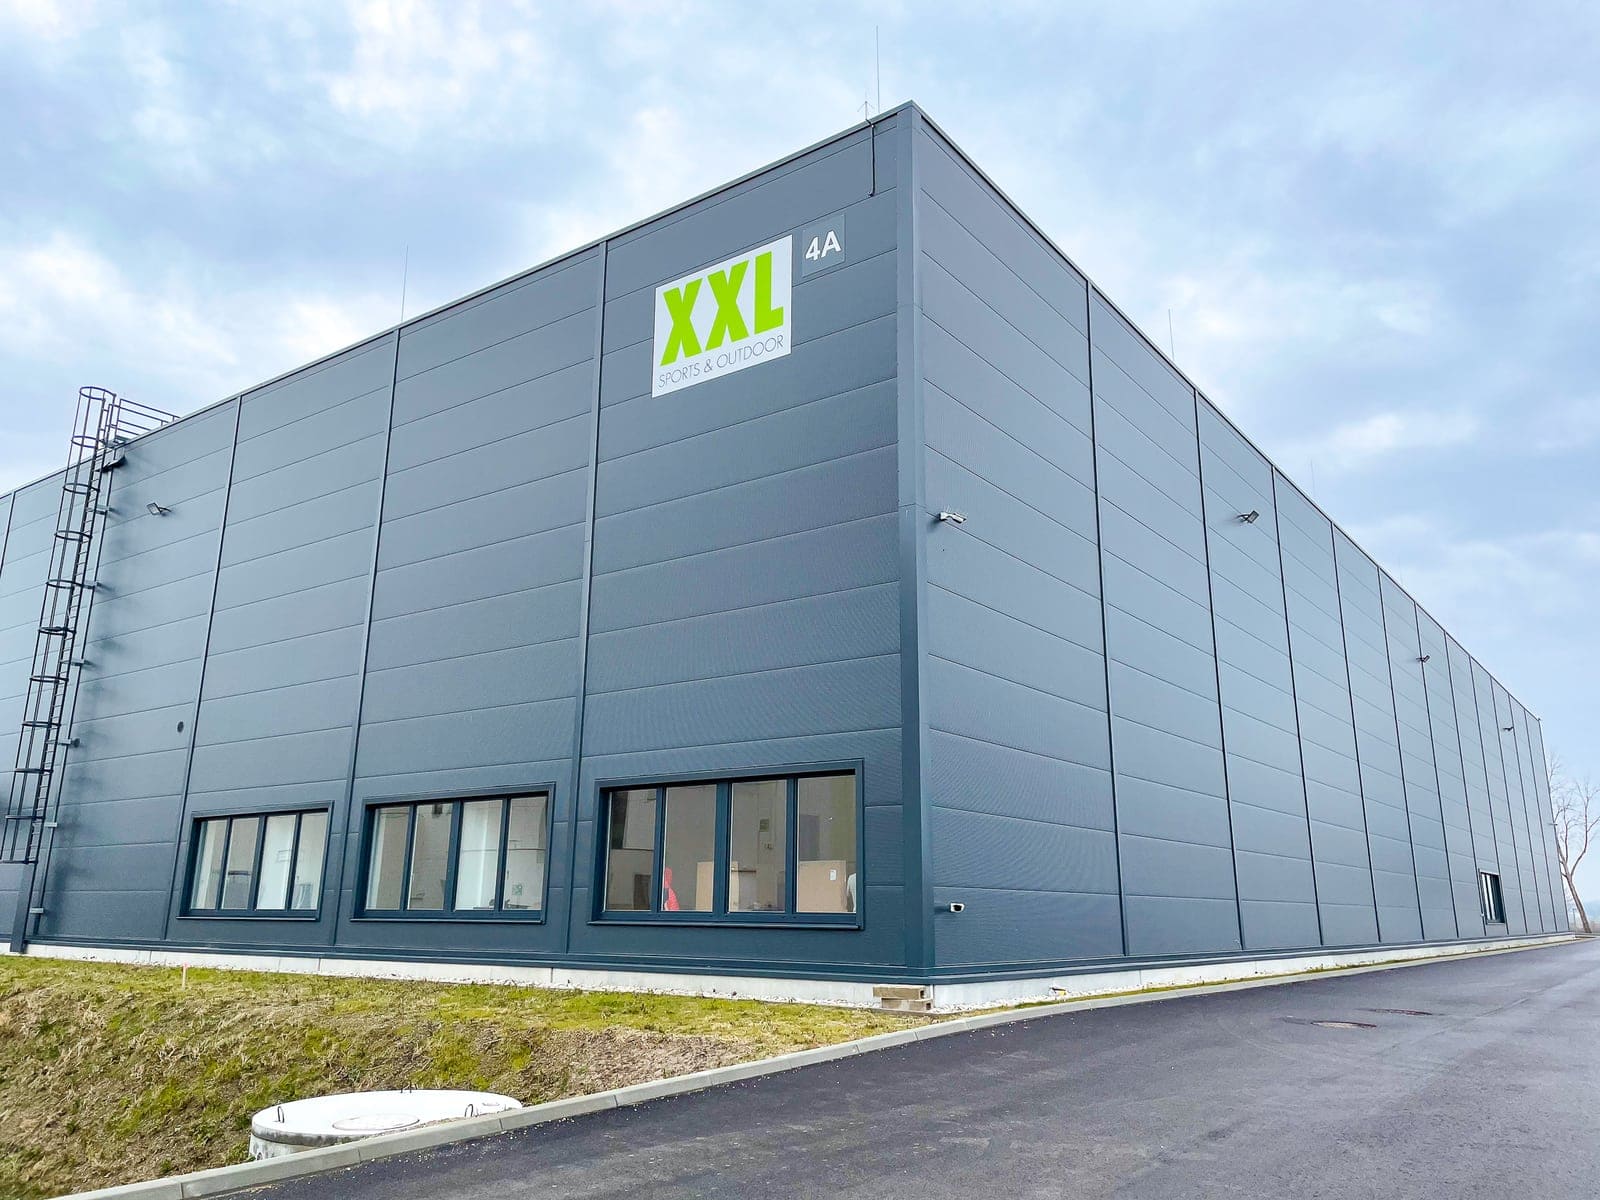 XXL continue their success story with Element Logic in Austria